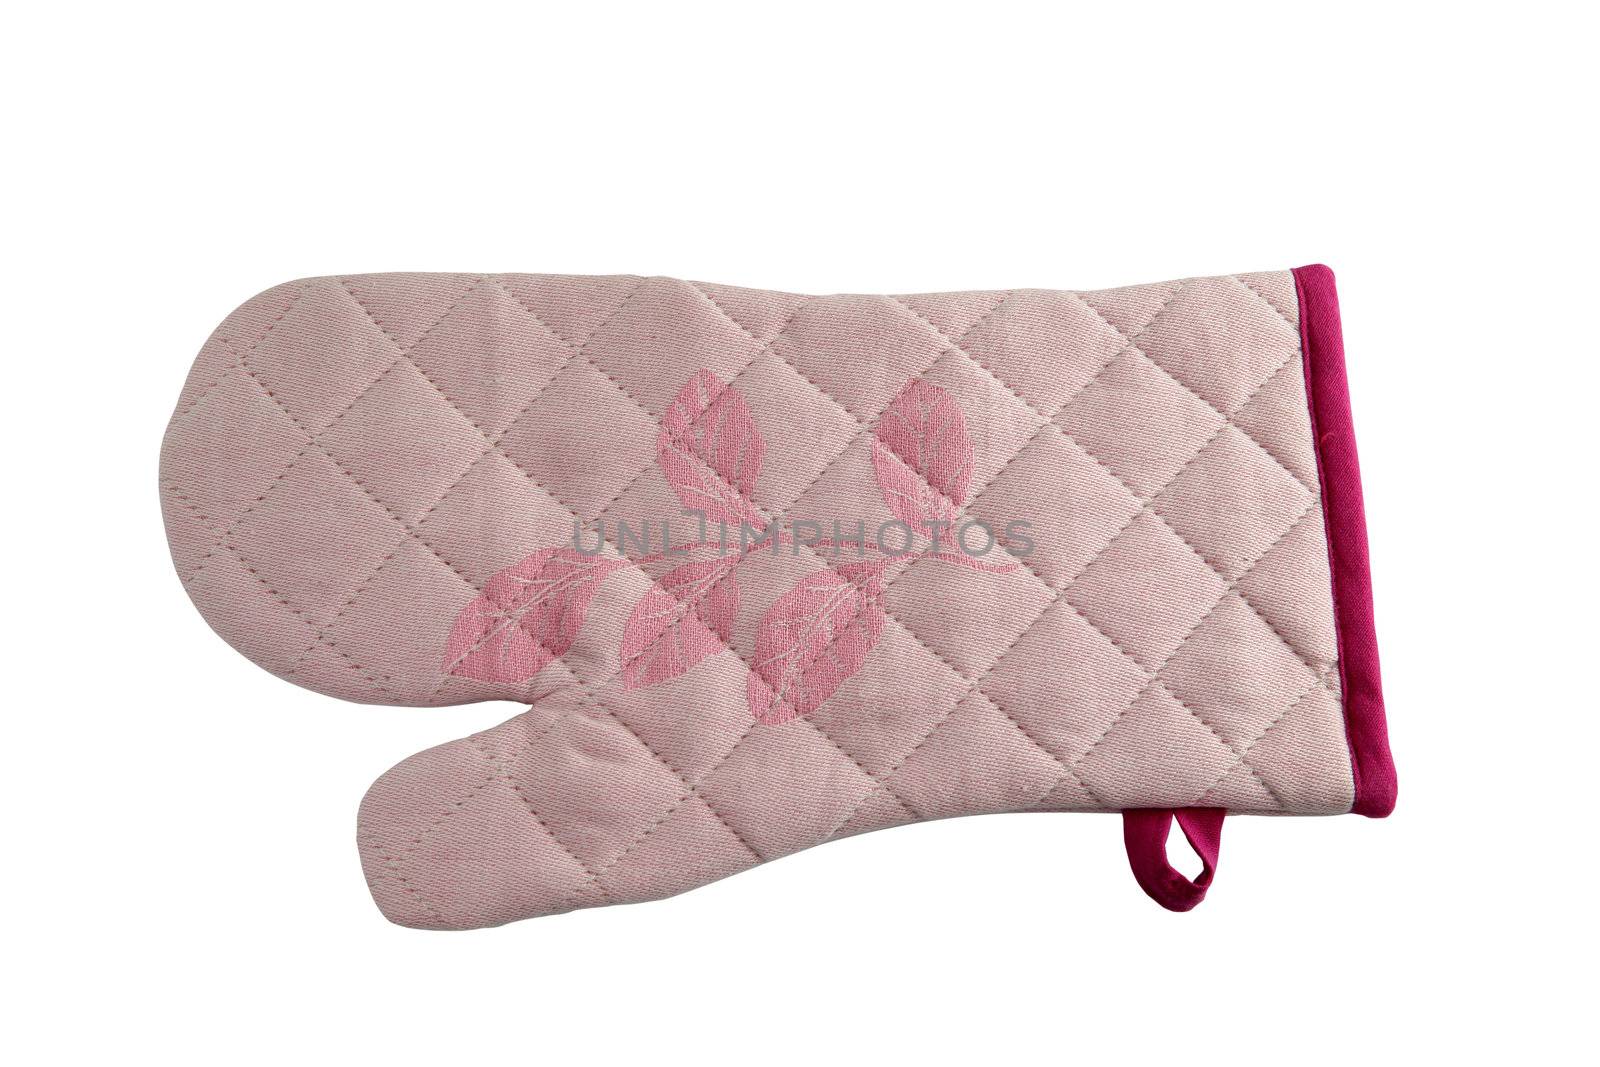 Oven glove by phovoir